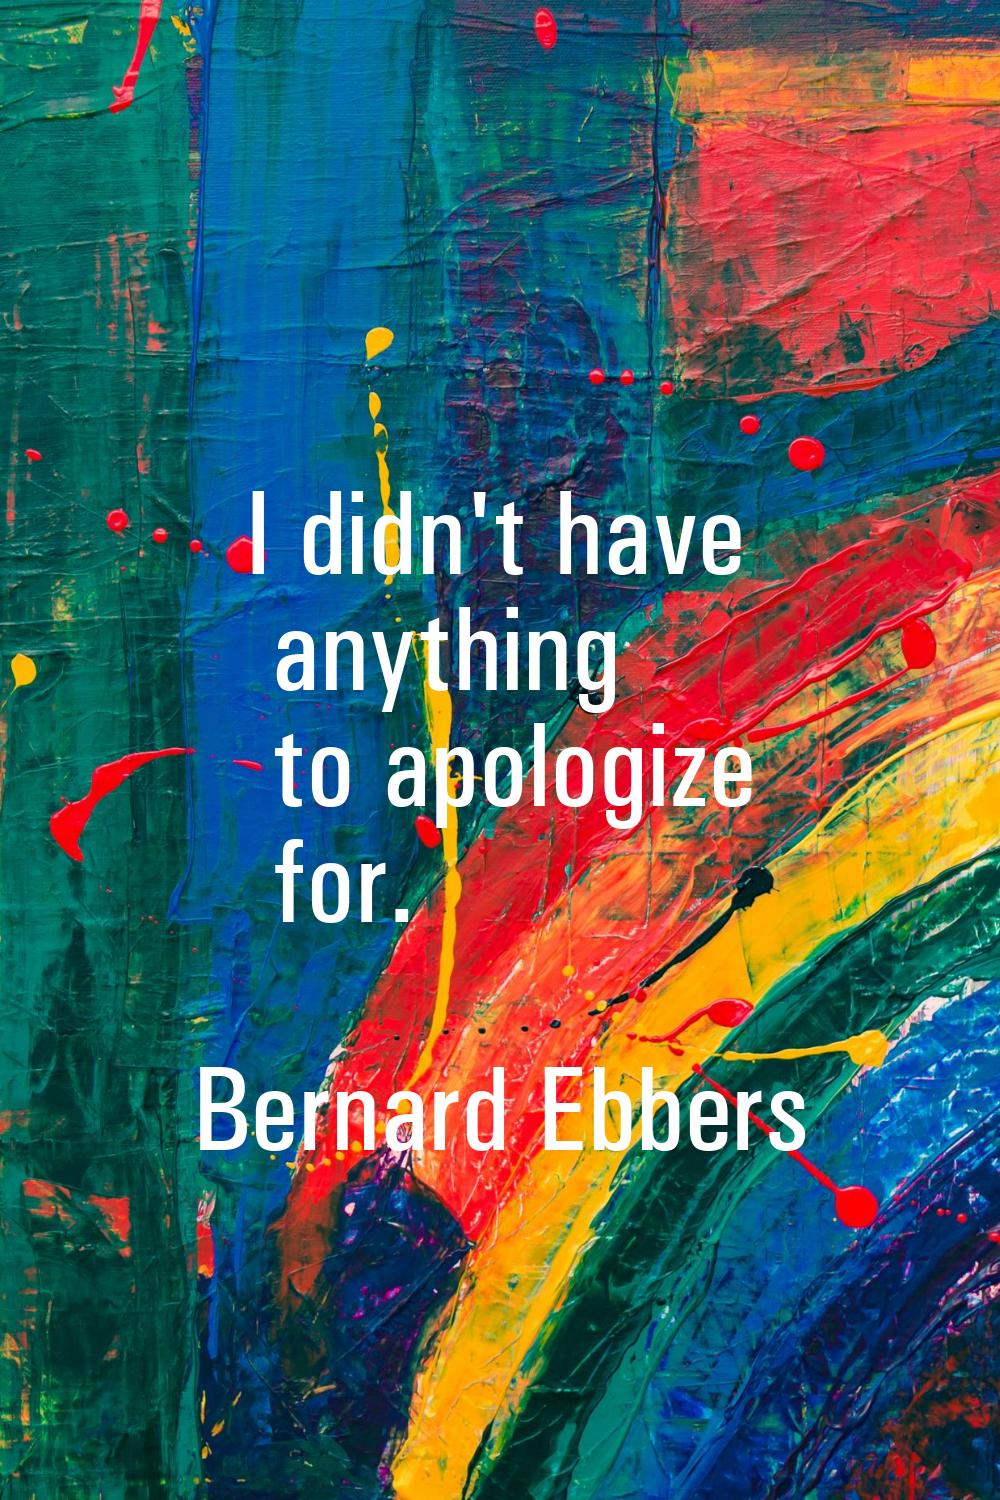 I didn't have anything to apologize for.